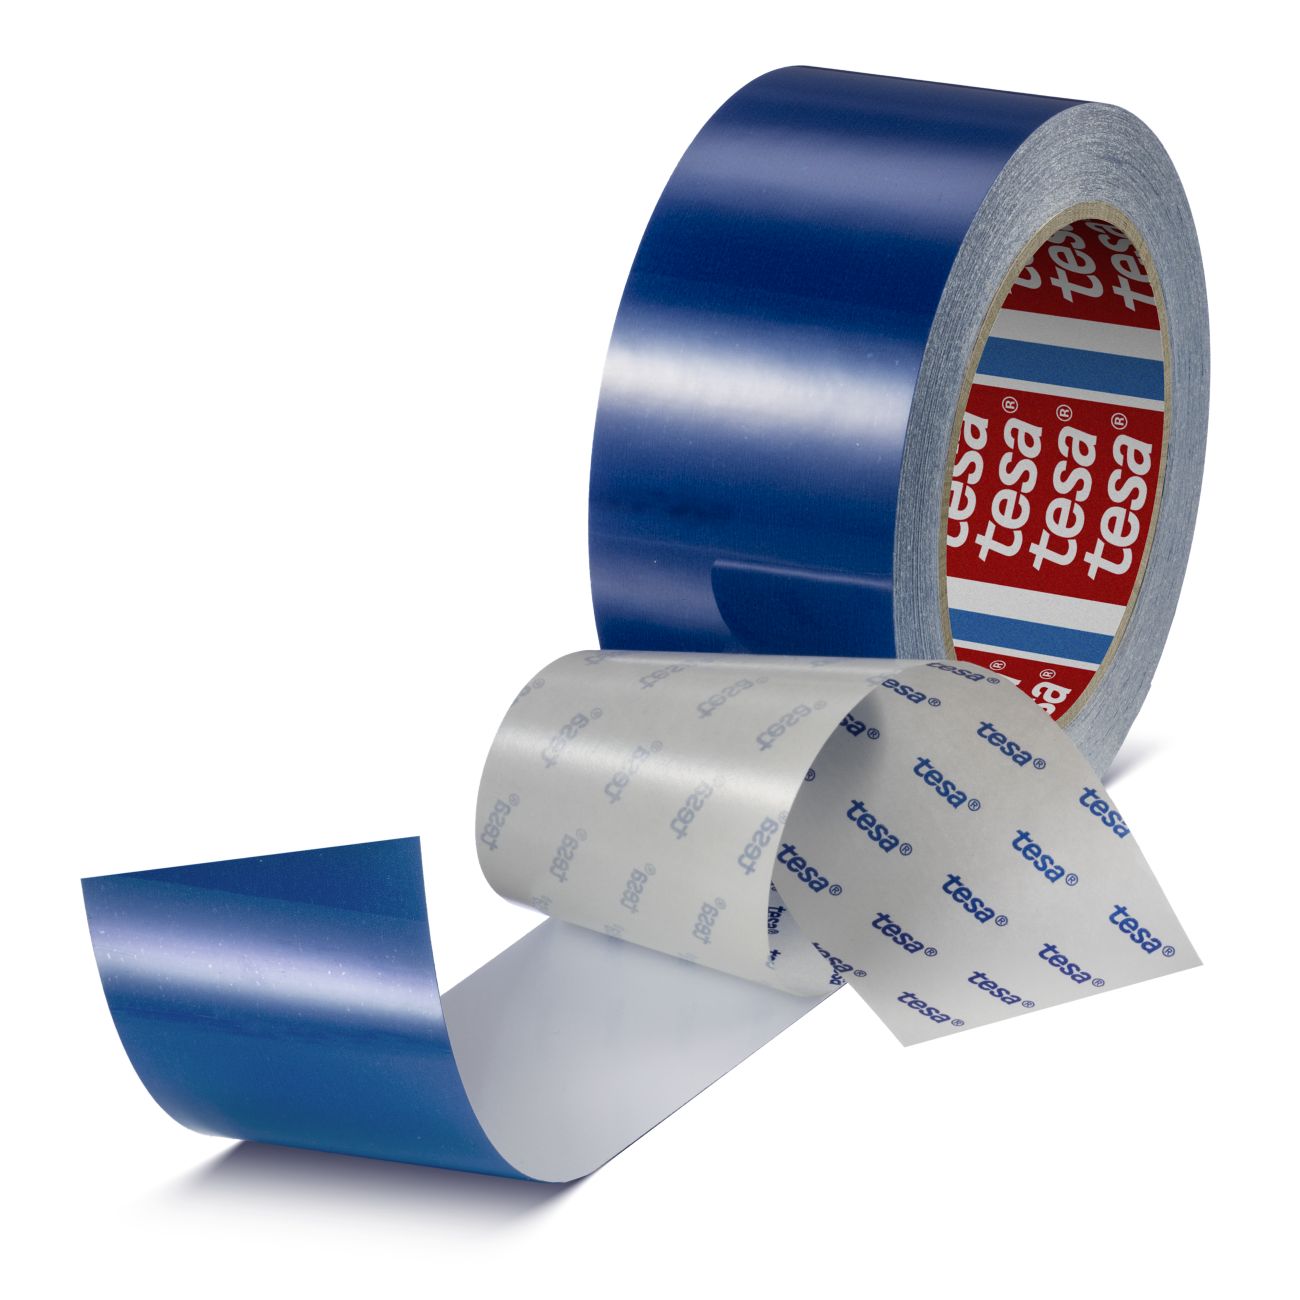 tesa 60960 Durable and scratch-resistant floor marking tape 50mmx20m blue